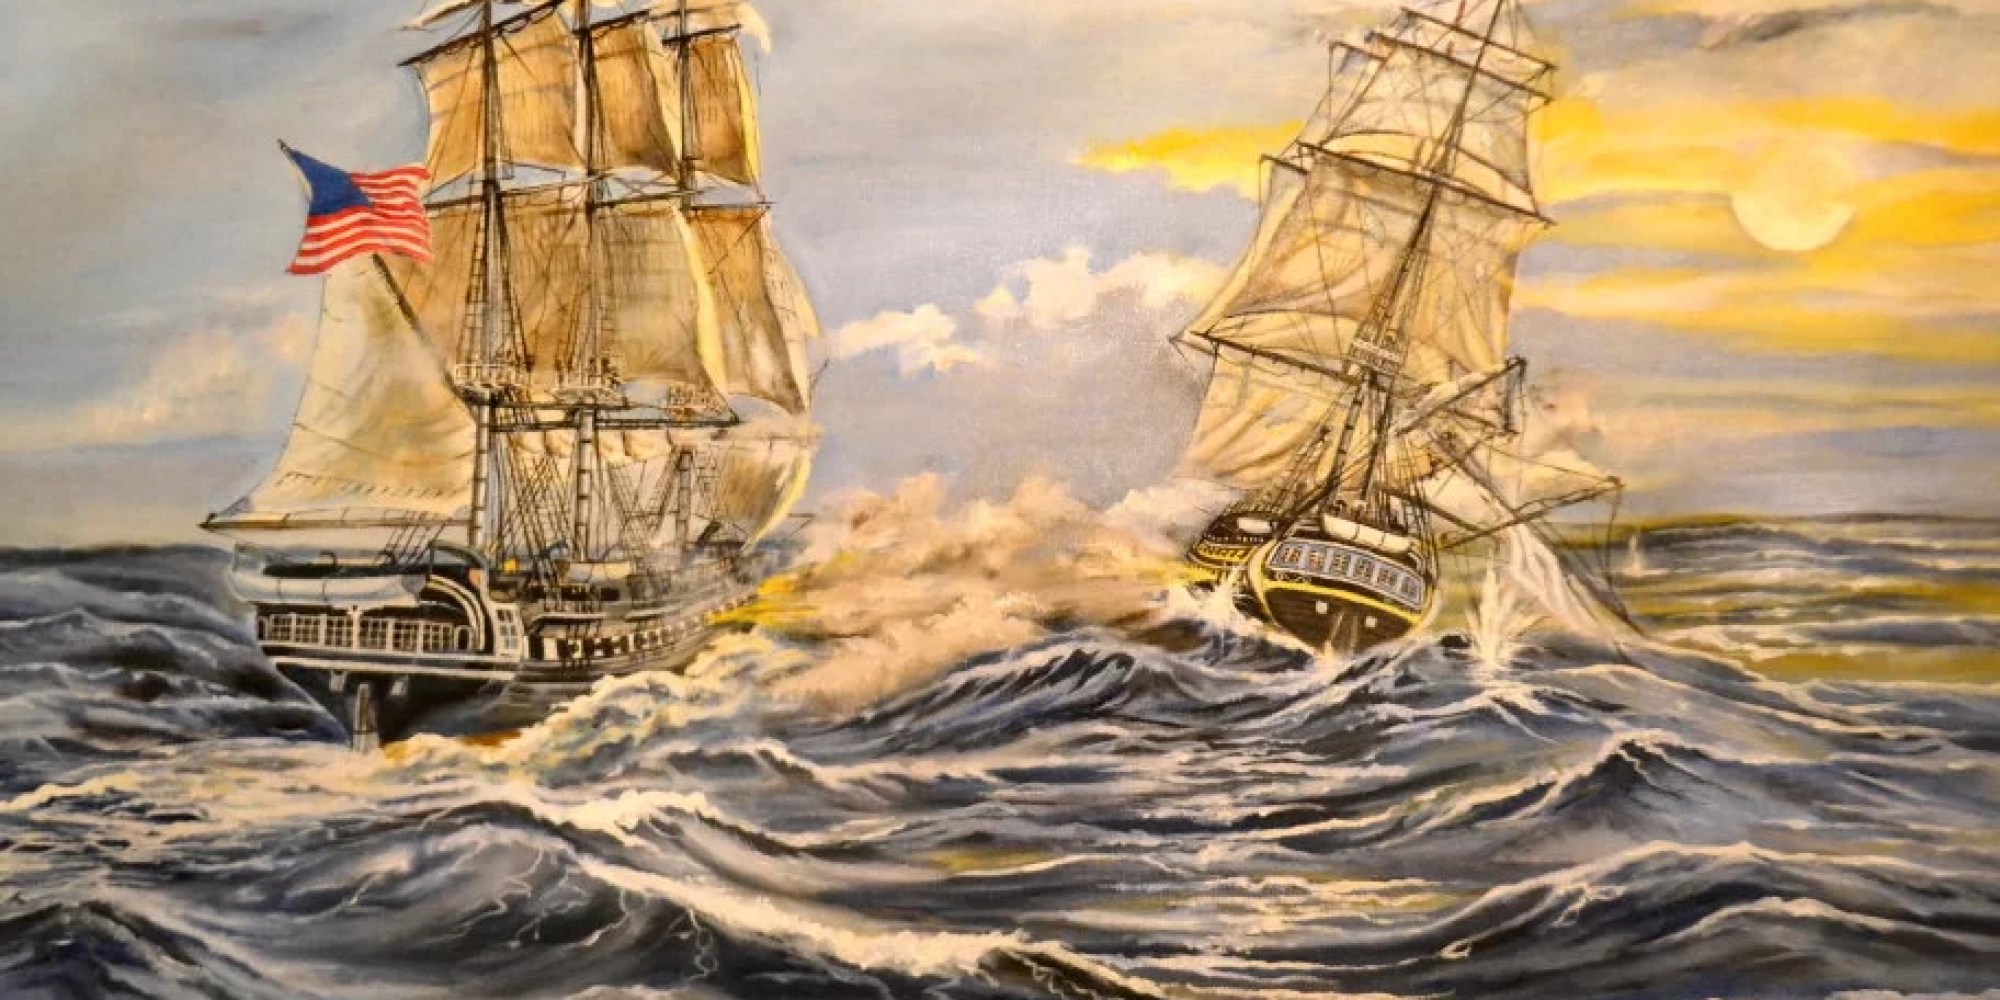 "Constitution Battle" Historical painting.   Original sold    Giclee' prints available. 
USS Constitution vs HMS Guerriere was a battle between an American and British ship during the War of 1812